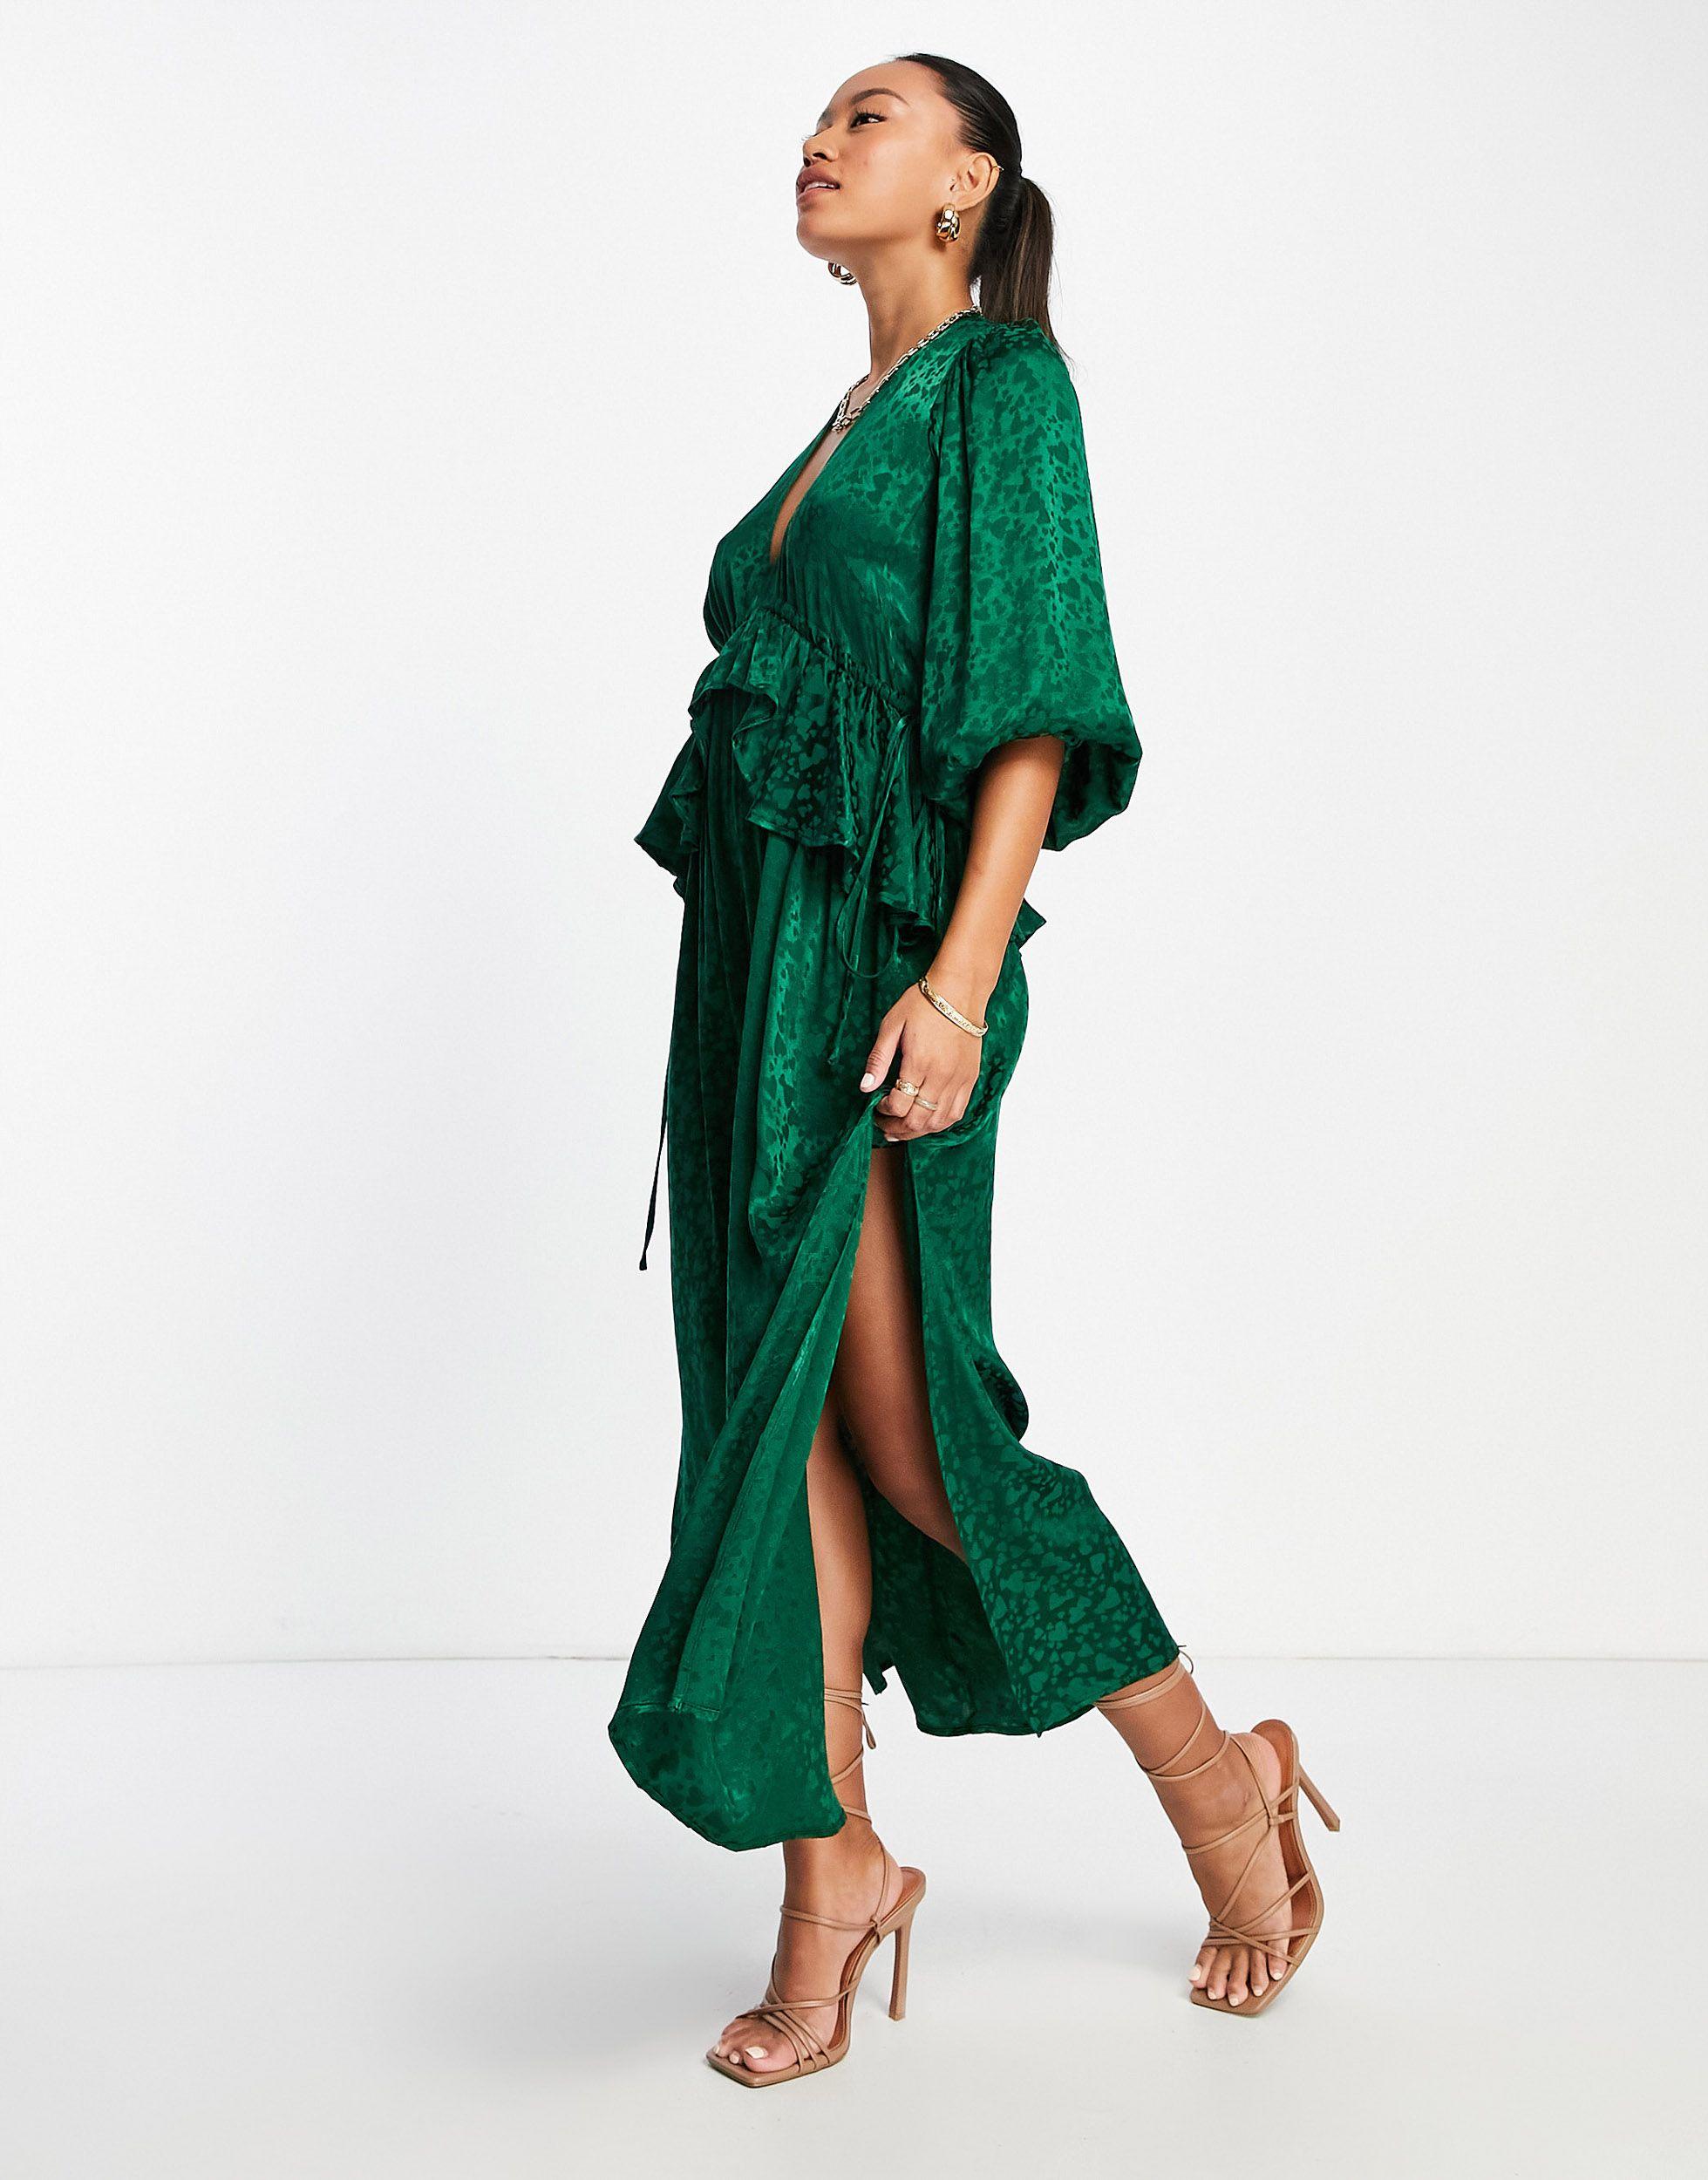 TOPSHOP Jacquard Riveria Occasion Dress in Green | Lyst